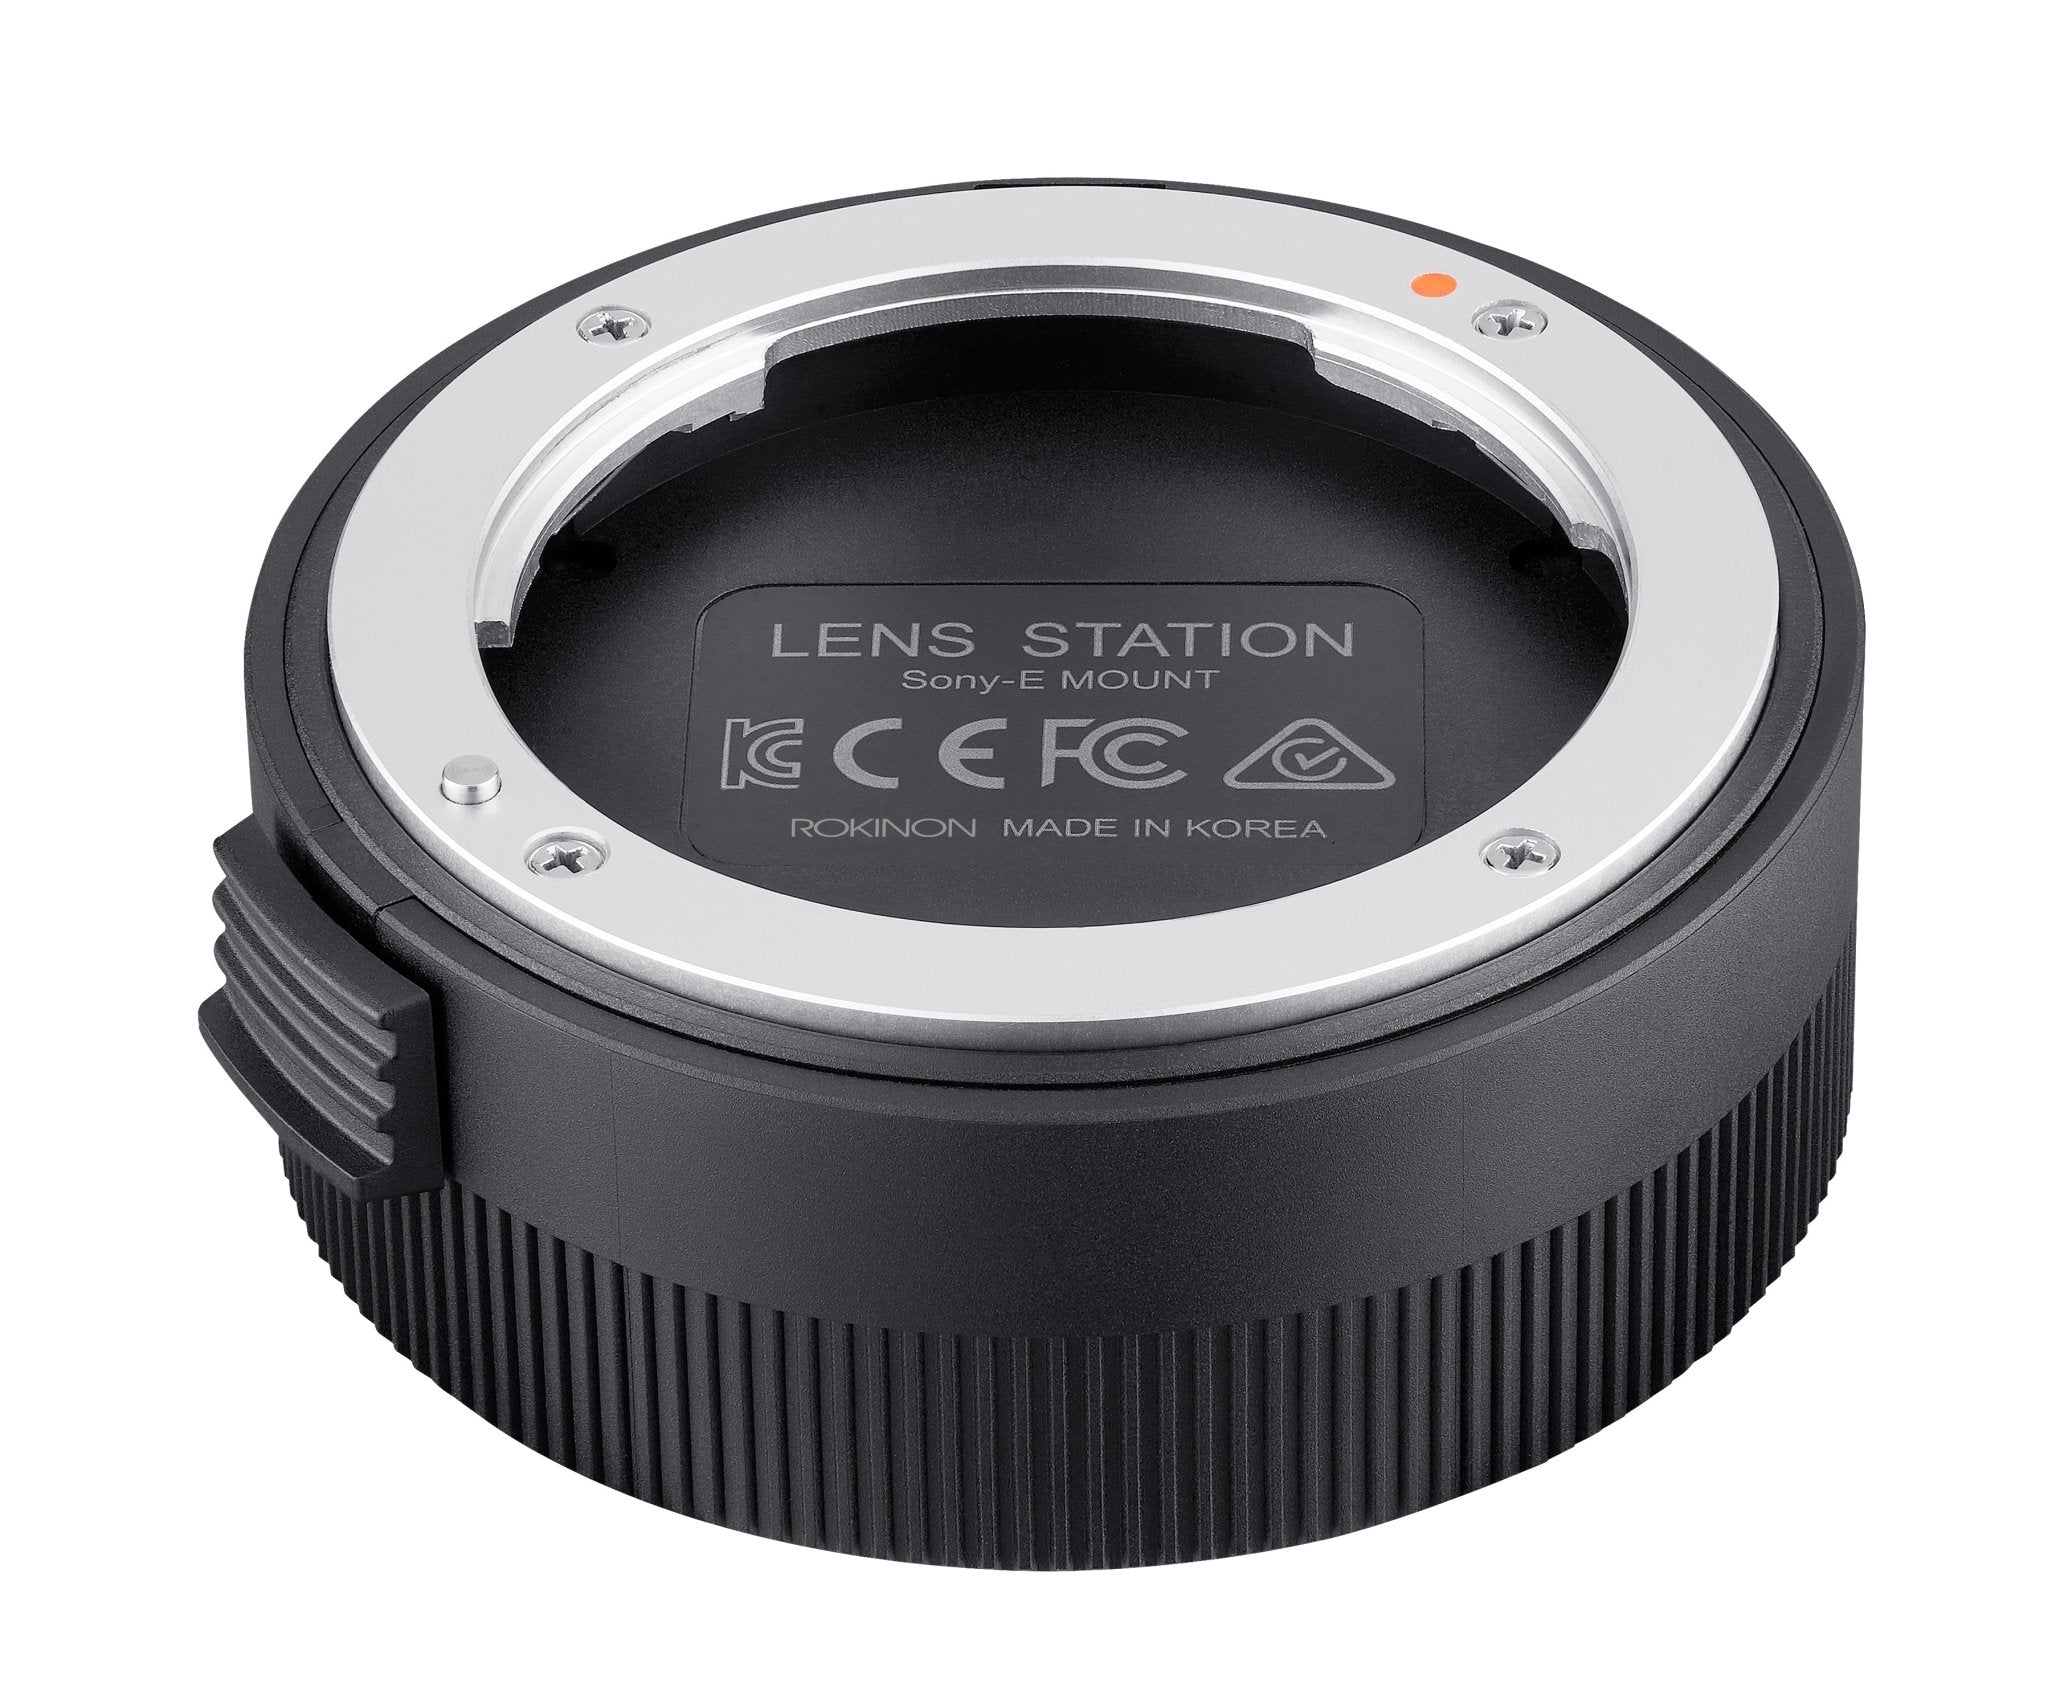 14mm F2.8 AF Wide Angle with Lens Station (Sony E) – Rokinon